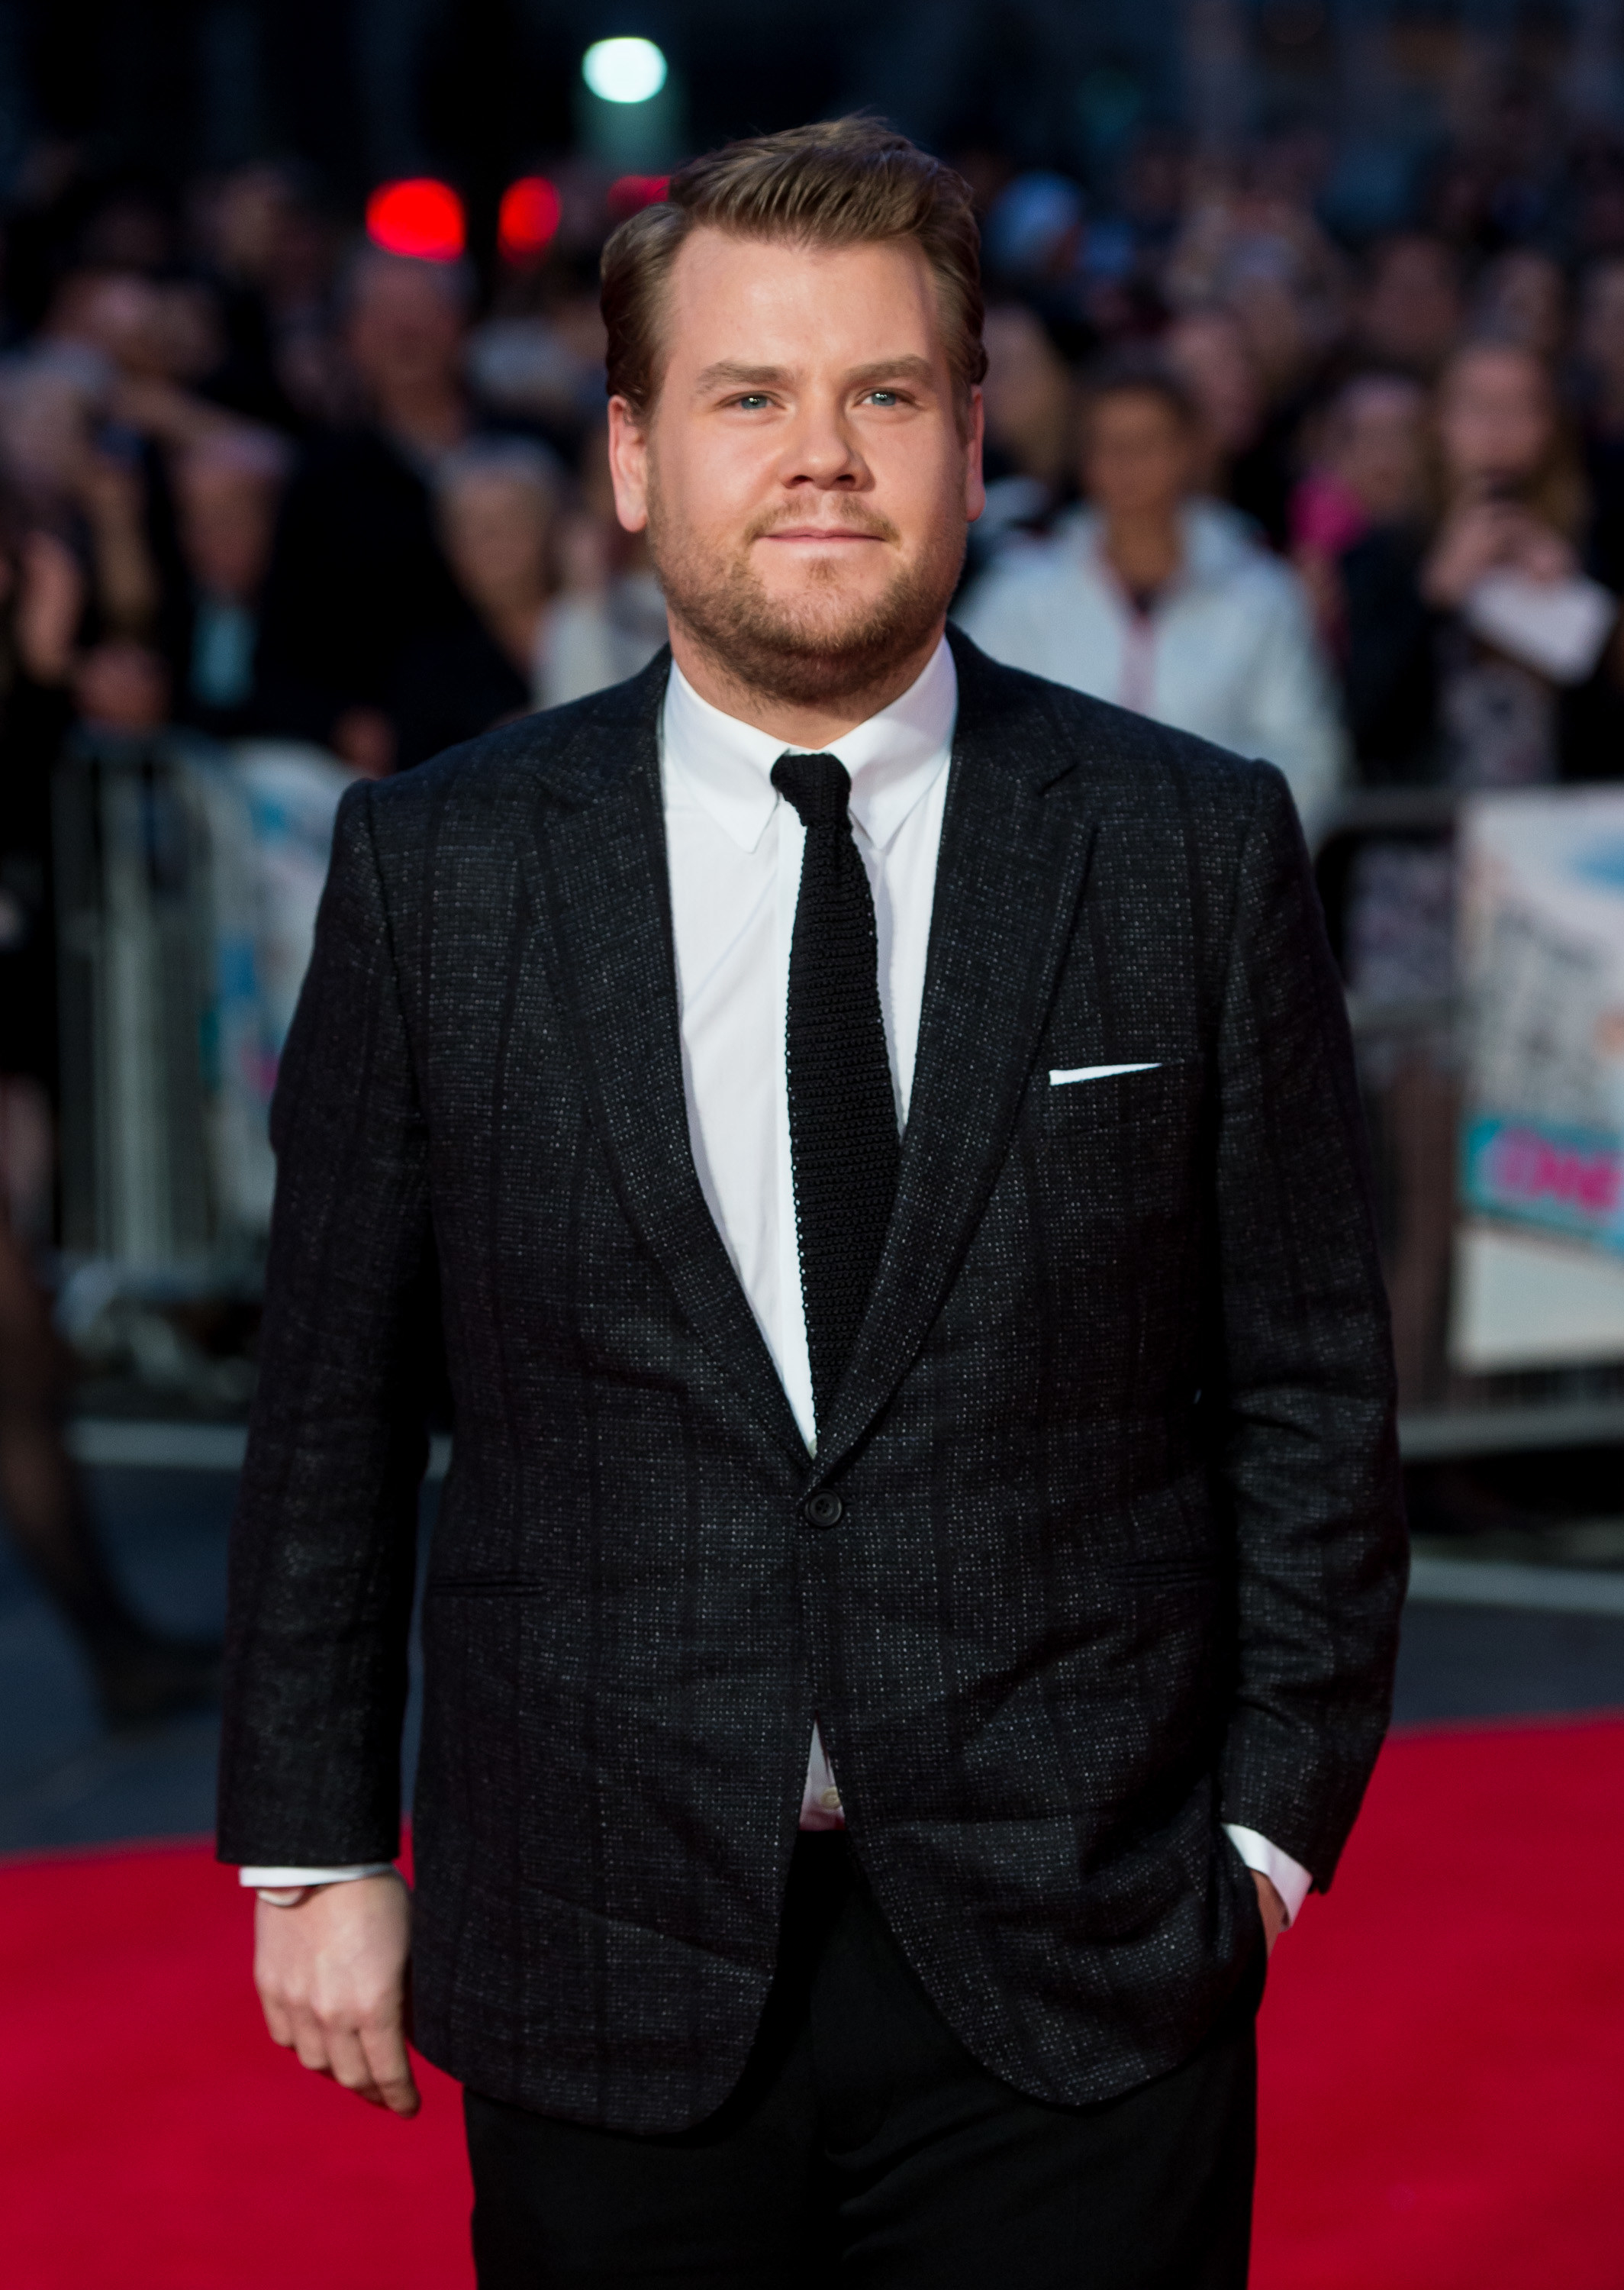 James Corden Wants To Give Up Spanx Under His Suits In 2020